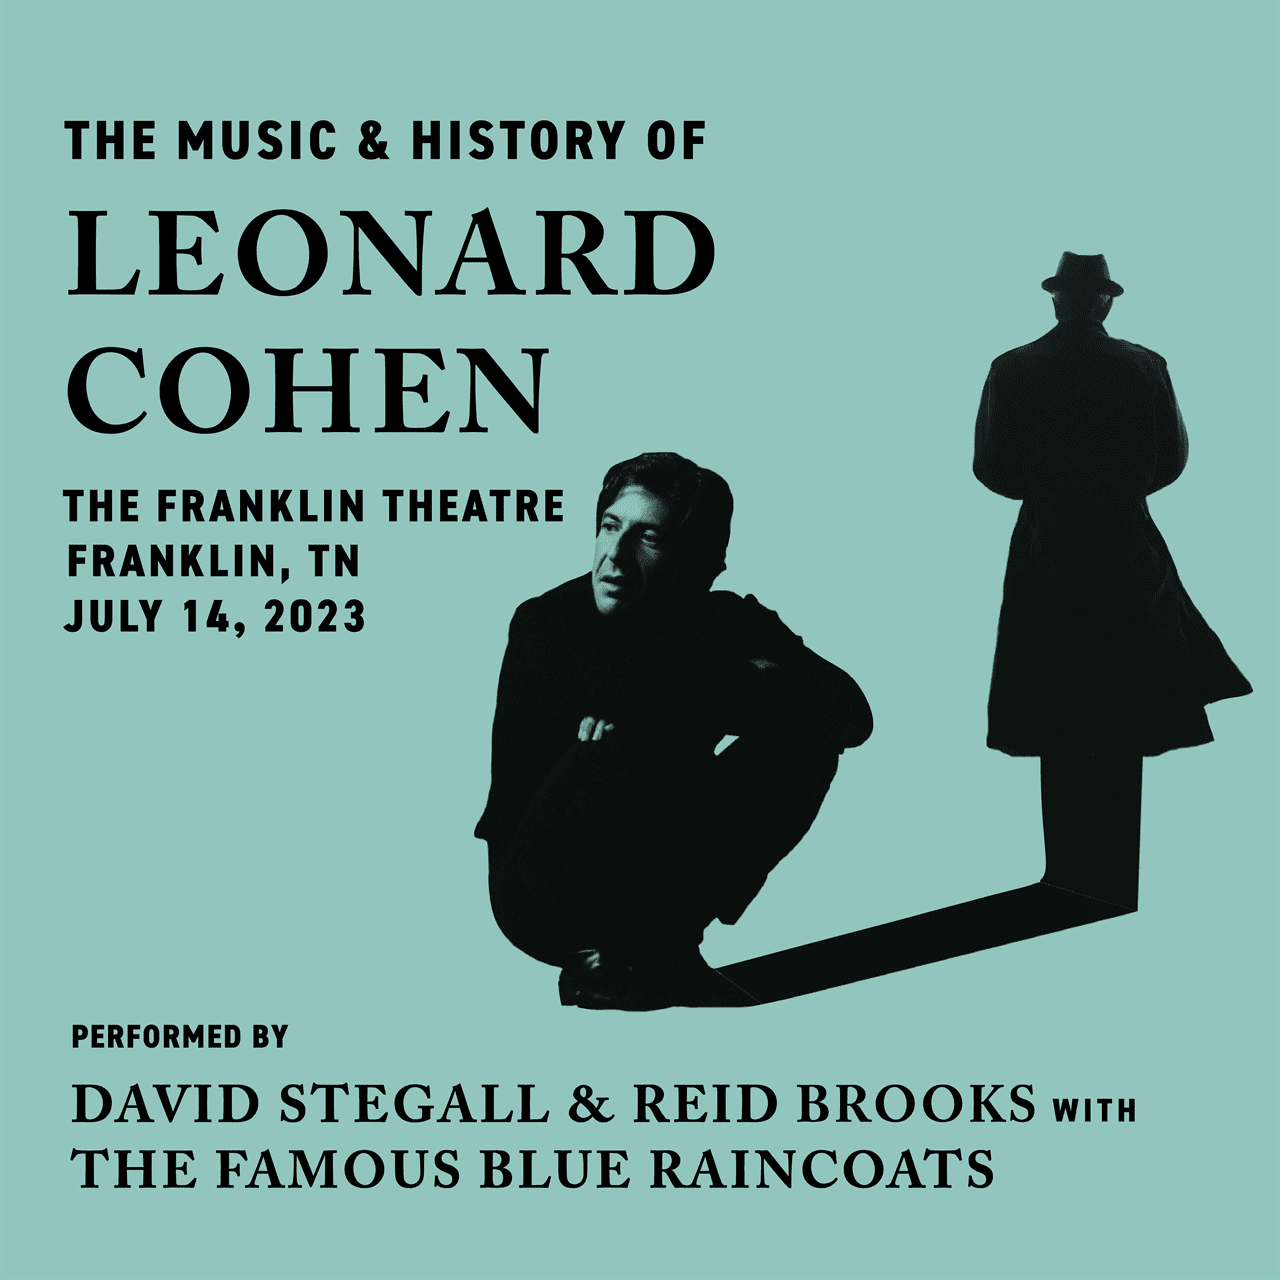 The Music & History of Leonard Cohen event in Franklin, TN in July at The Franklin Theatre.